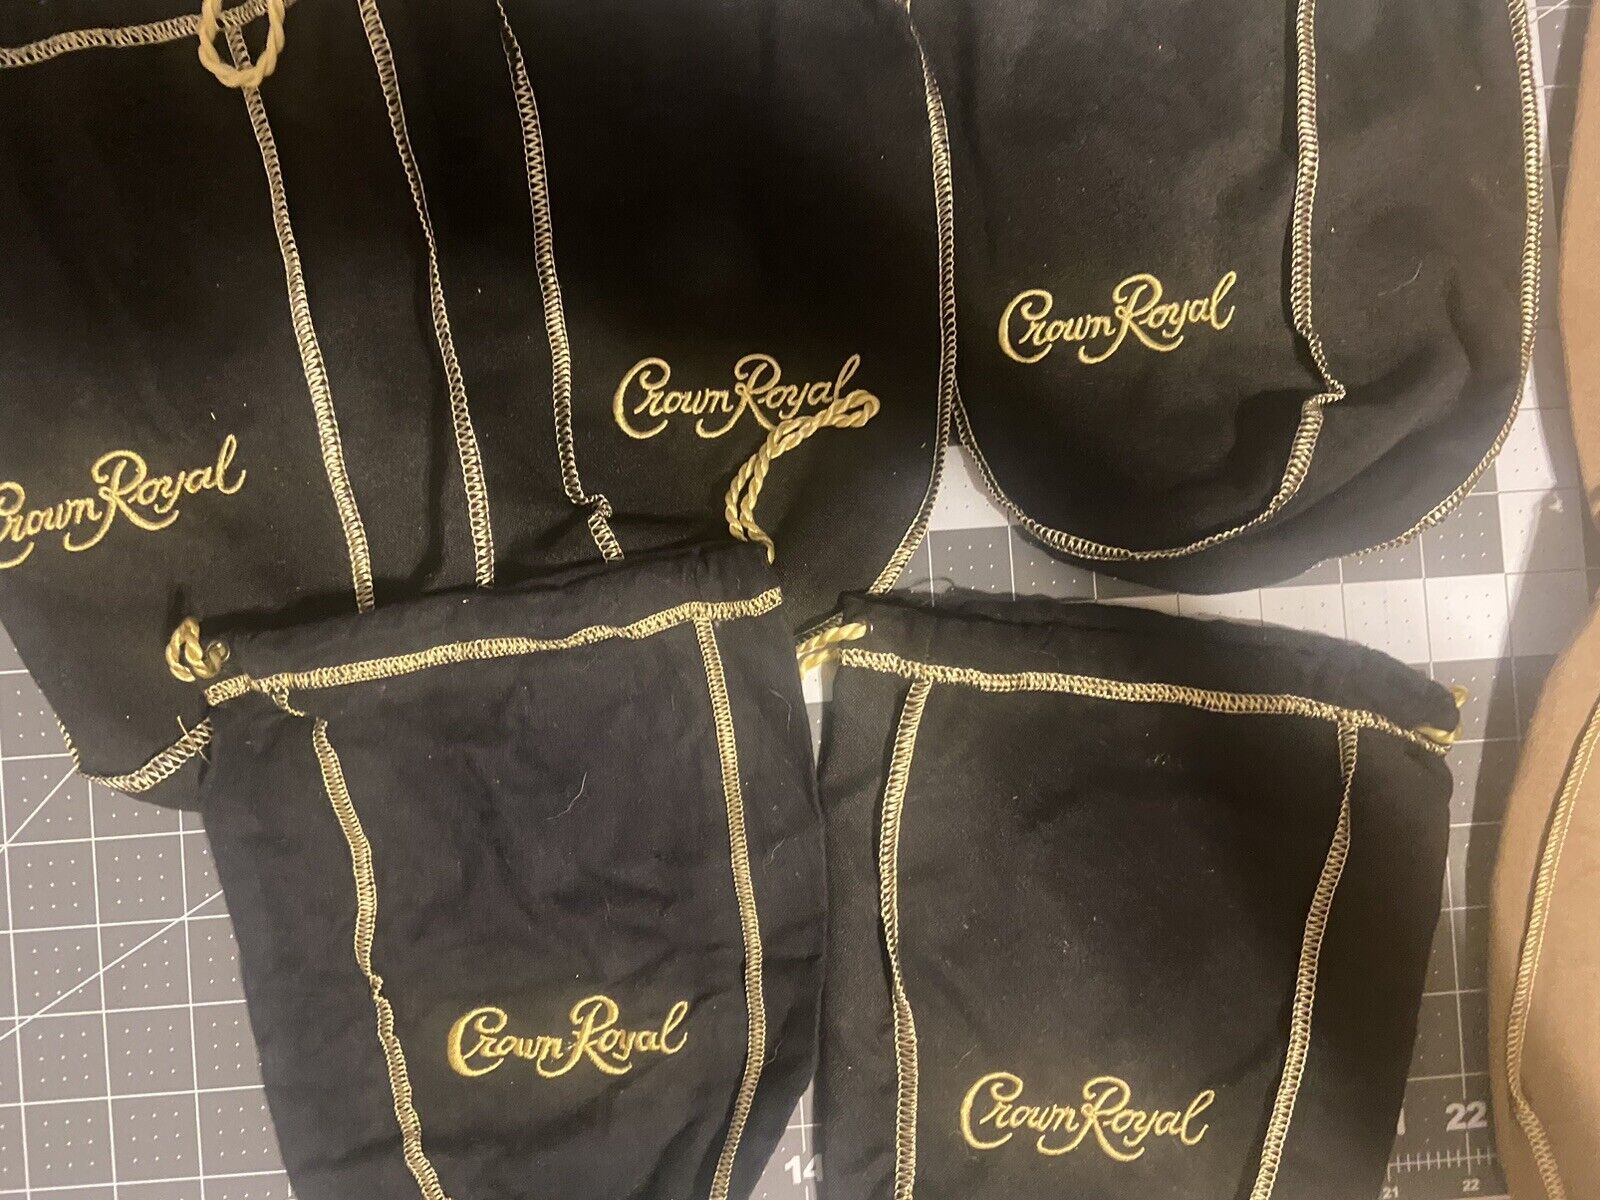 Lot of 4 Crown Royal 1.75L Extra Large Black Drawstring Bags 12 inch Quilt/craft